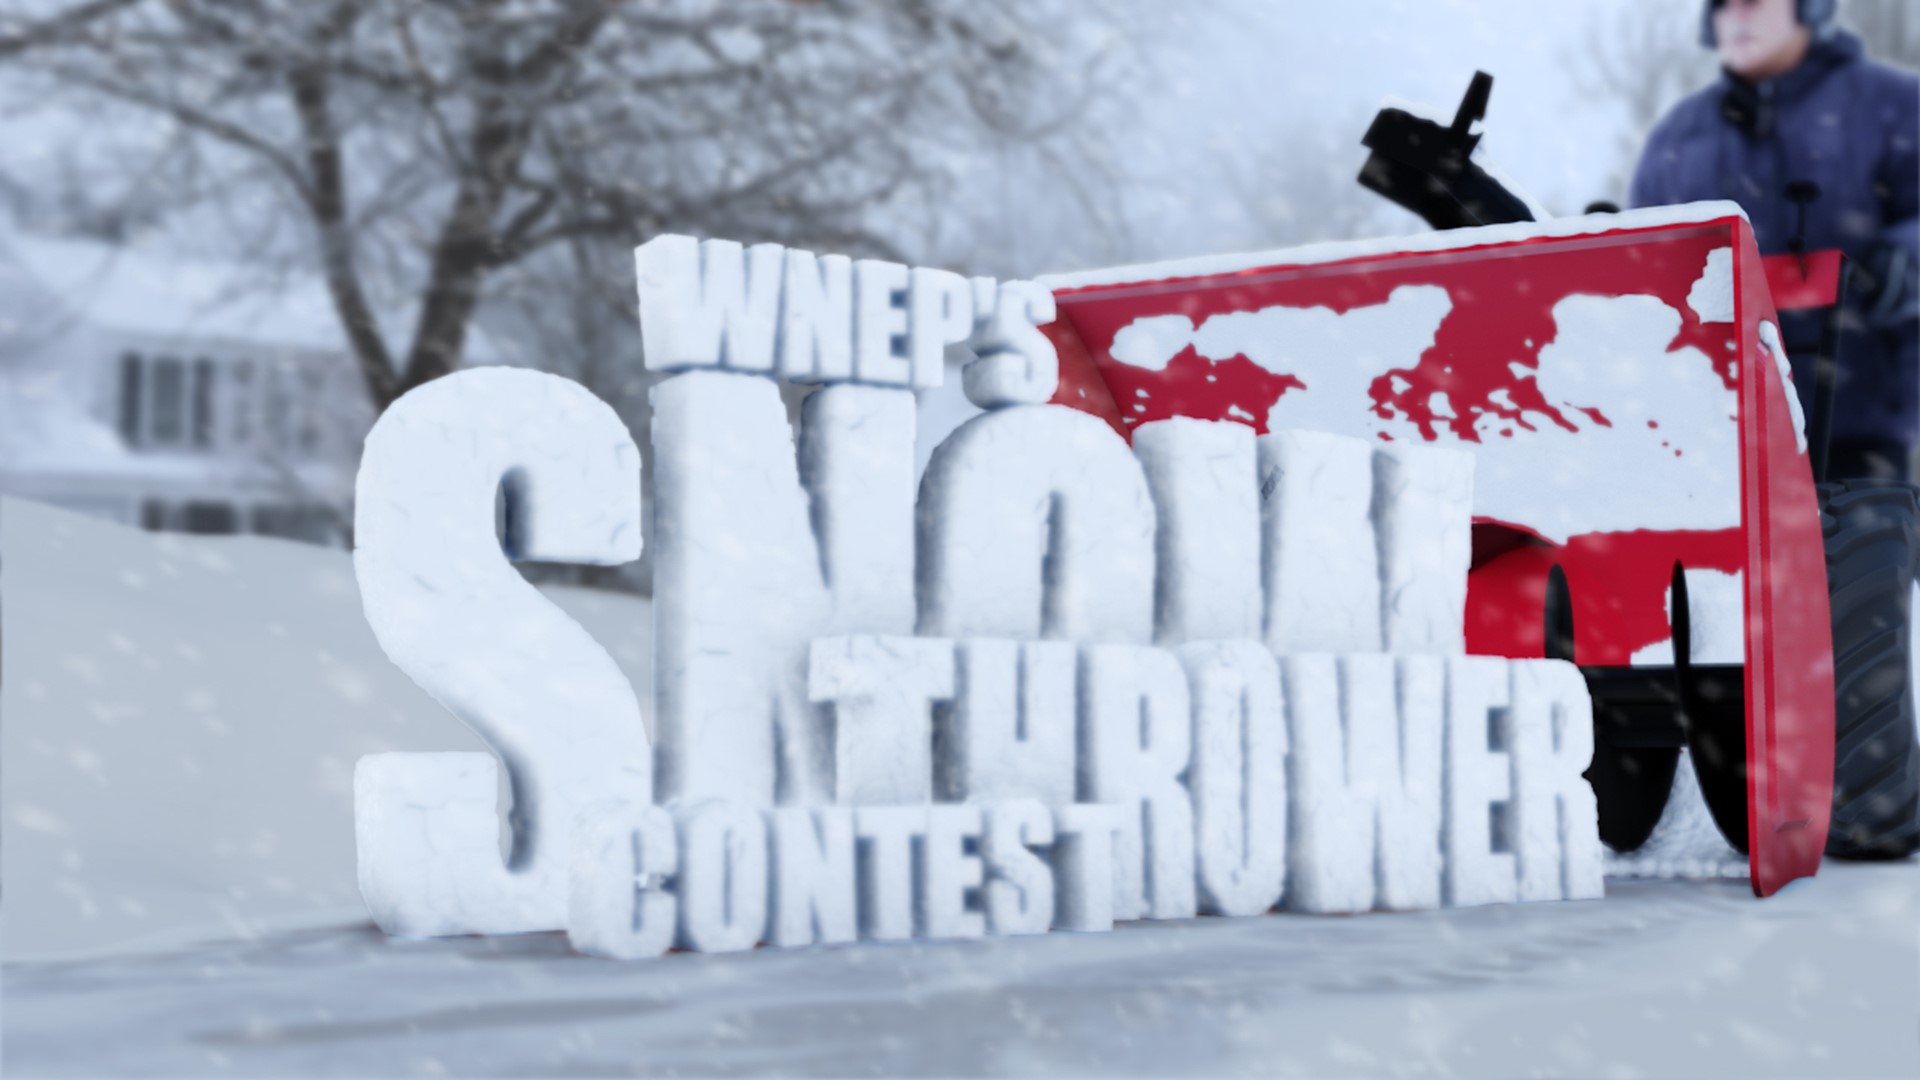 The winners of the Snow Thrower Contest have been drawn!